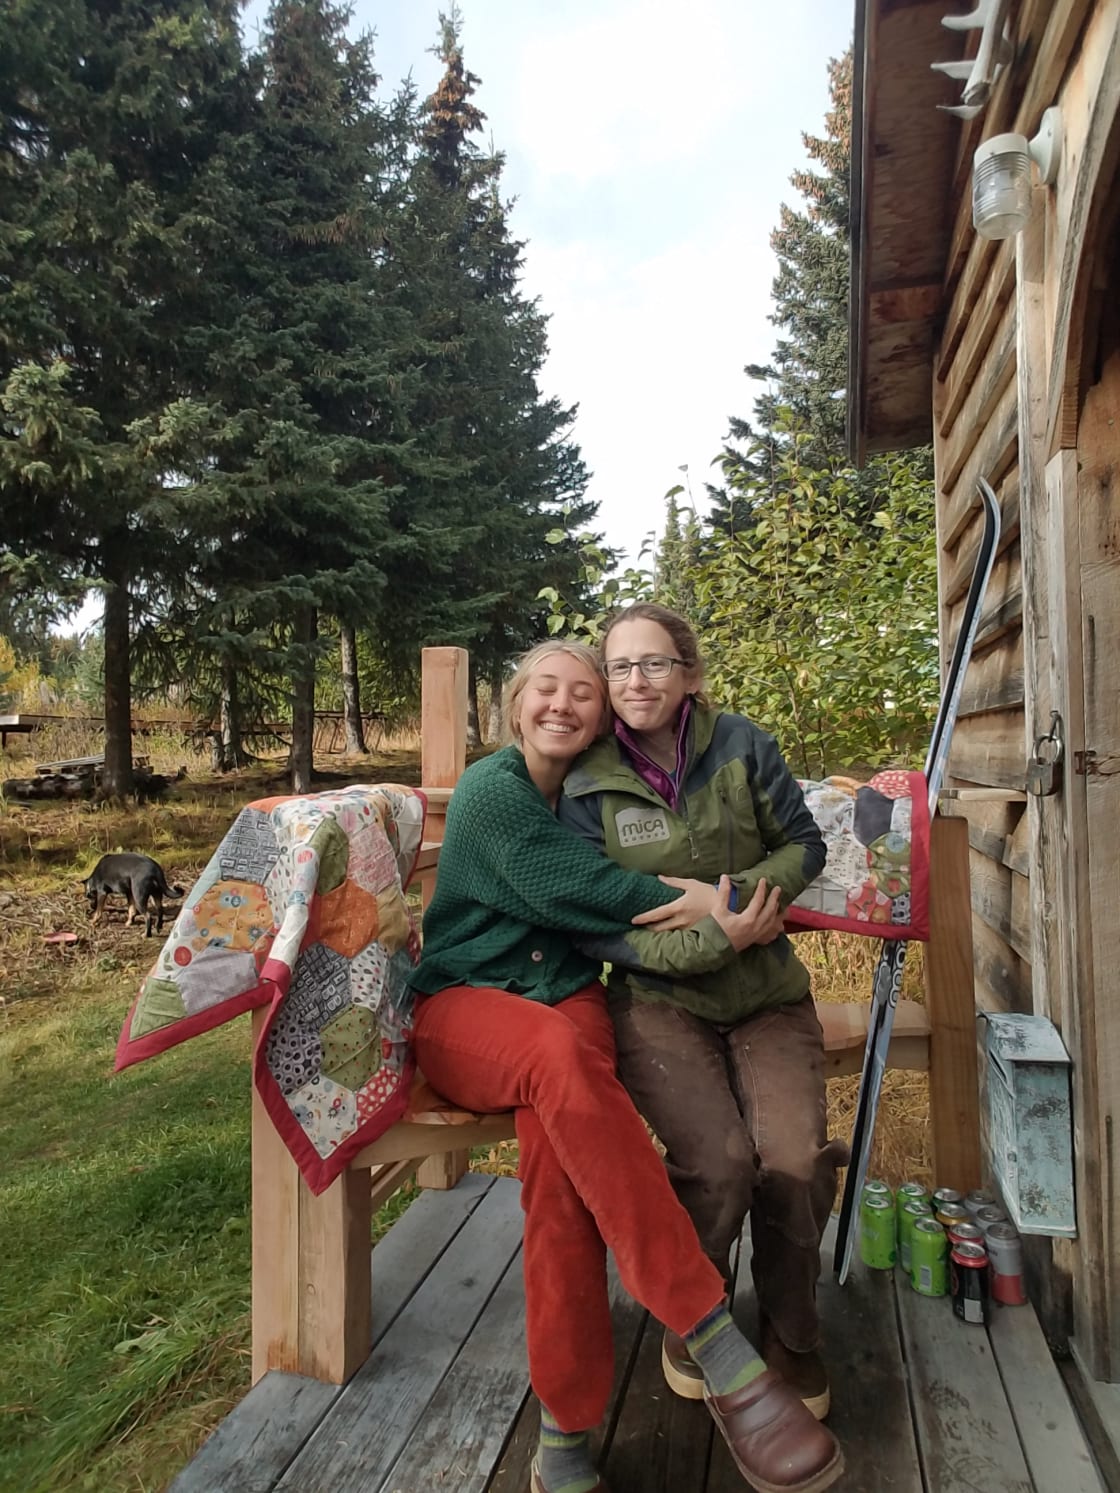 A lovely quilting get away with a friend!